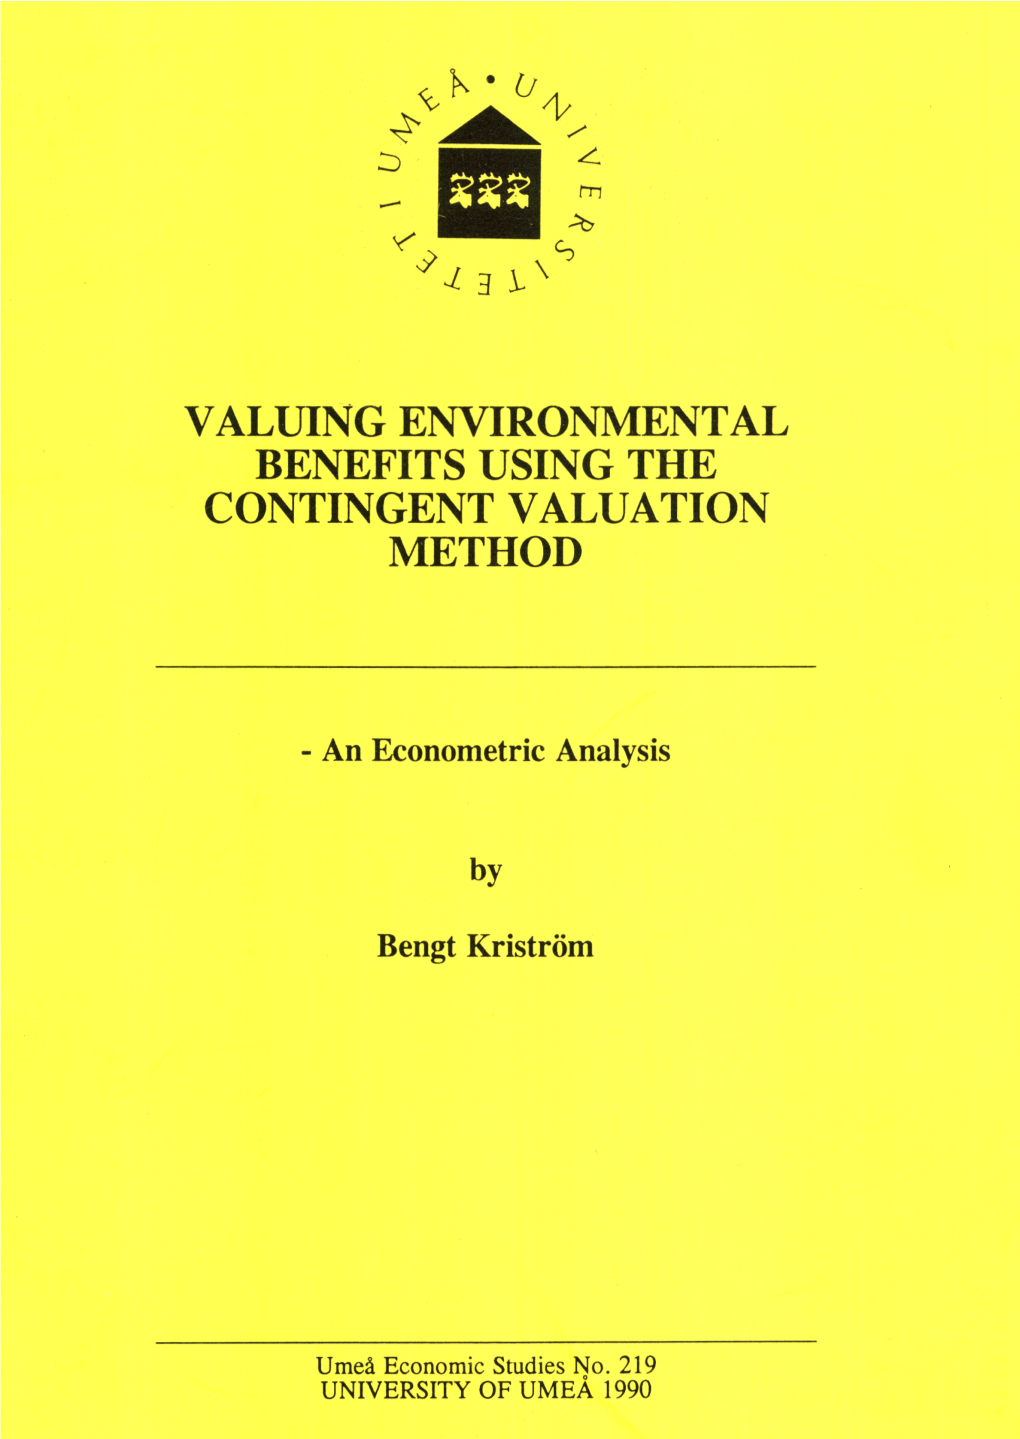 Valuing Environmental Benefits Using the Contingent Valuation Method: an Econometric Analysis, 1990